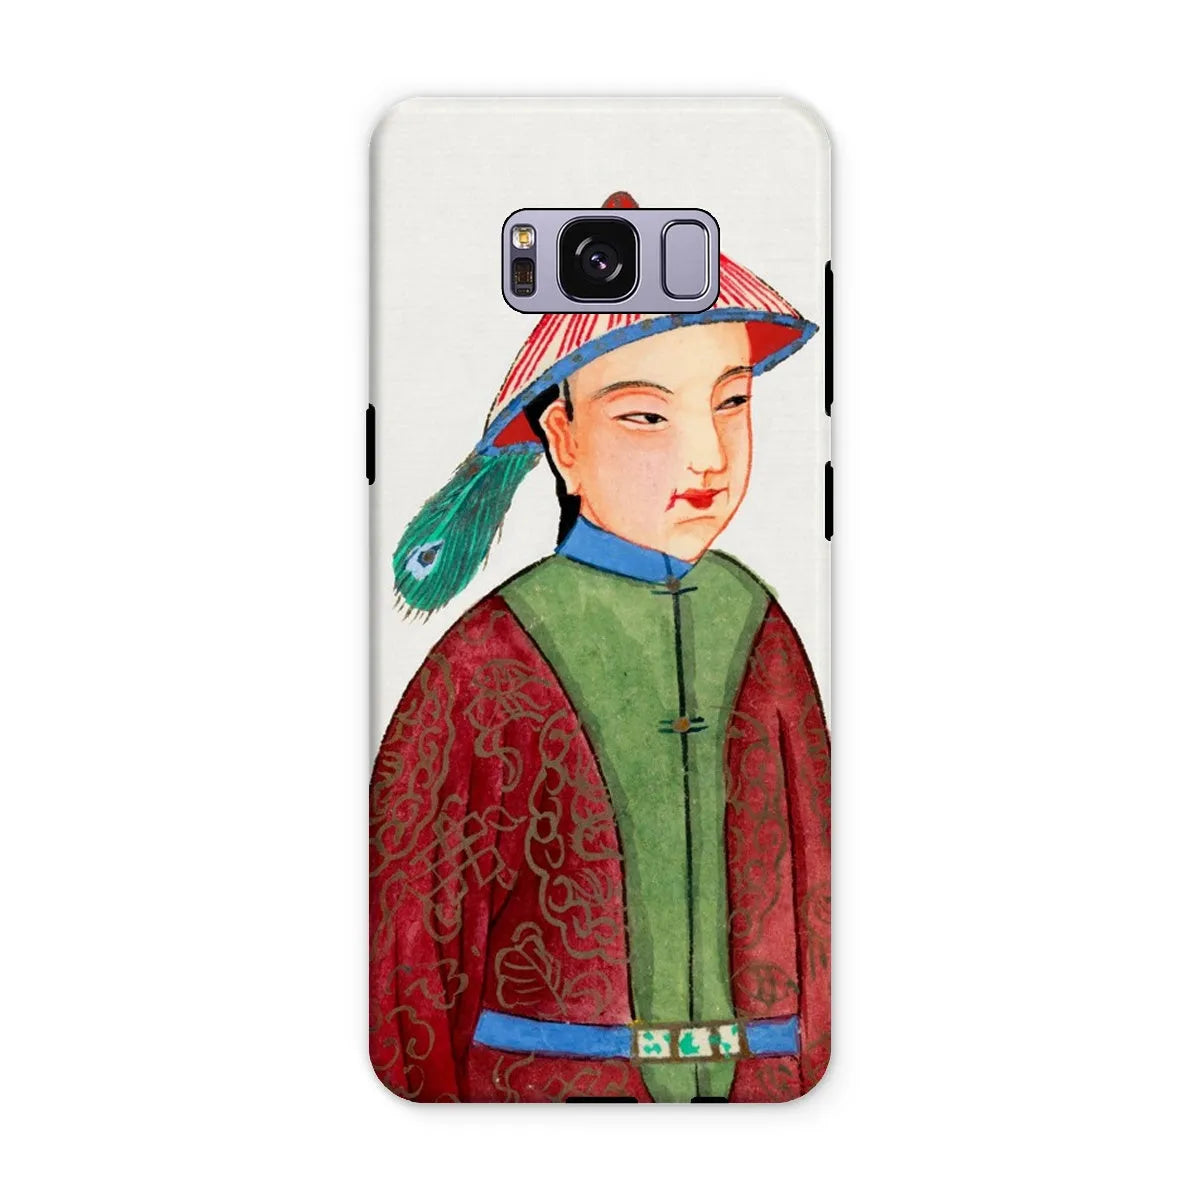 Manchu Dandy - Chinese Aesthetic Art Phone Case - Samsung Galaxy S8 Plus / Matte - Mobile Phone Cases - Aesthetic Art